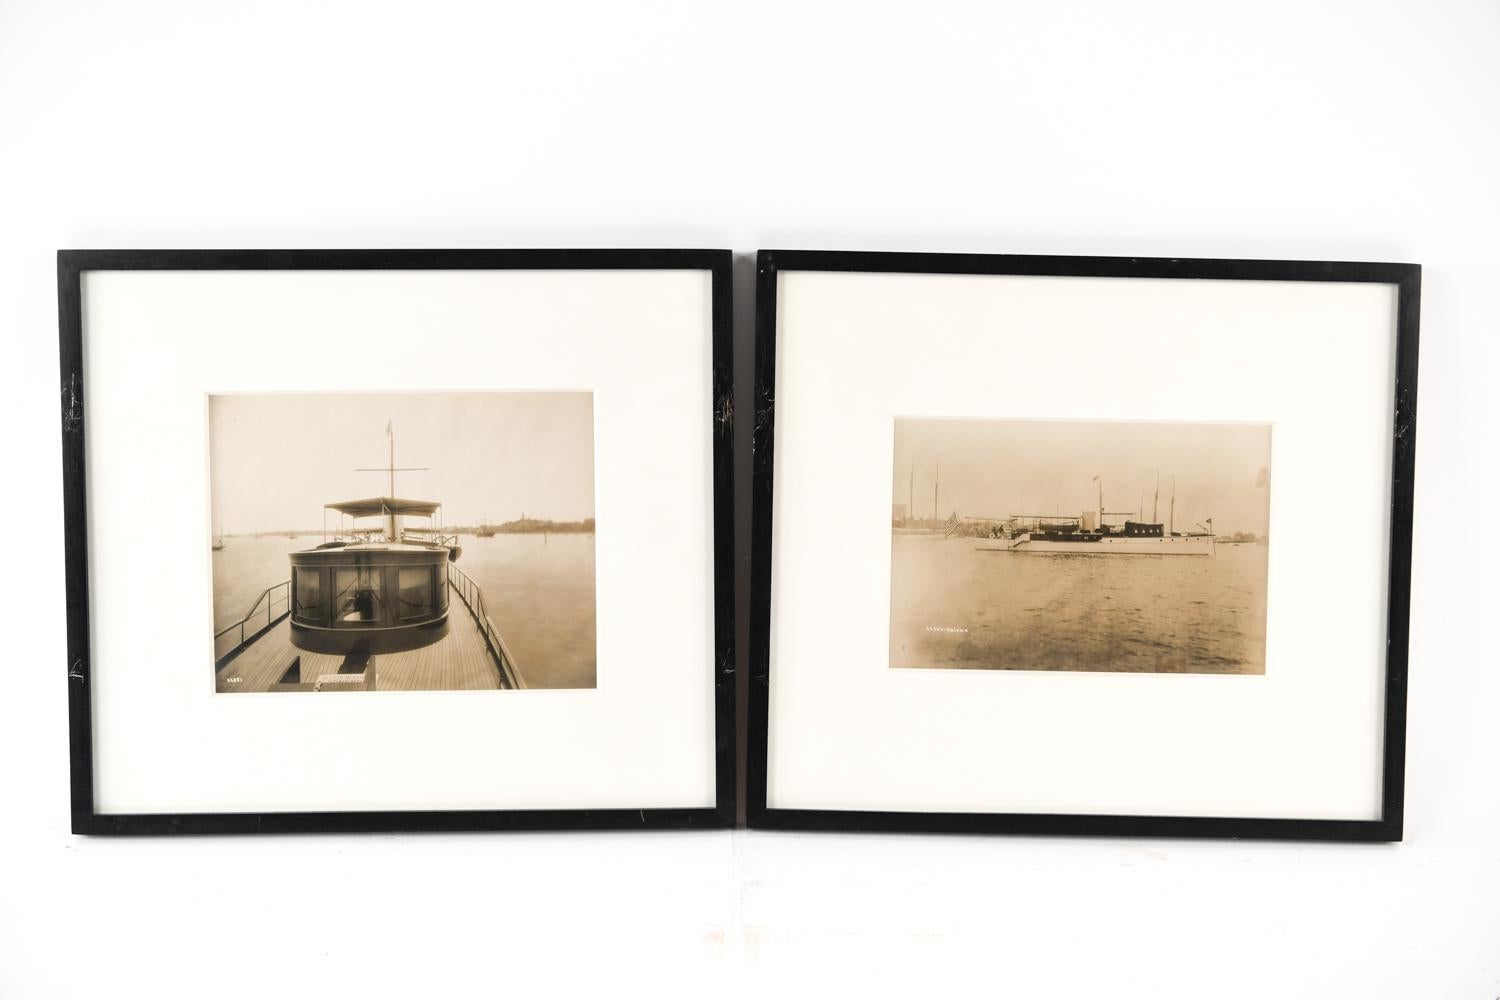 Set of 10 maritime photos by Nathaniel Livermore Stebbins a noted American marine photographer. All blind stamped N. L. Stebbins Boston Mass lower right corner. Numbered lower left corner, Circa 1910. Framed in black frames with white double thick